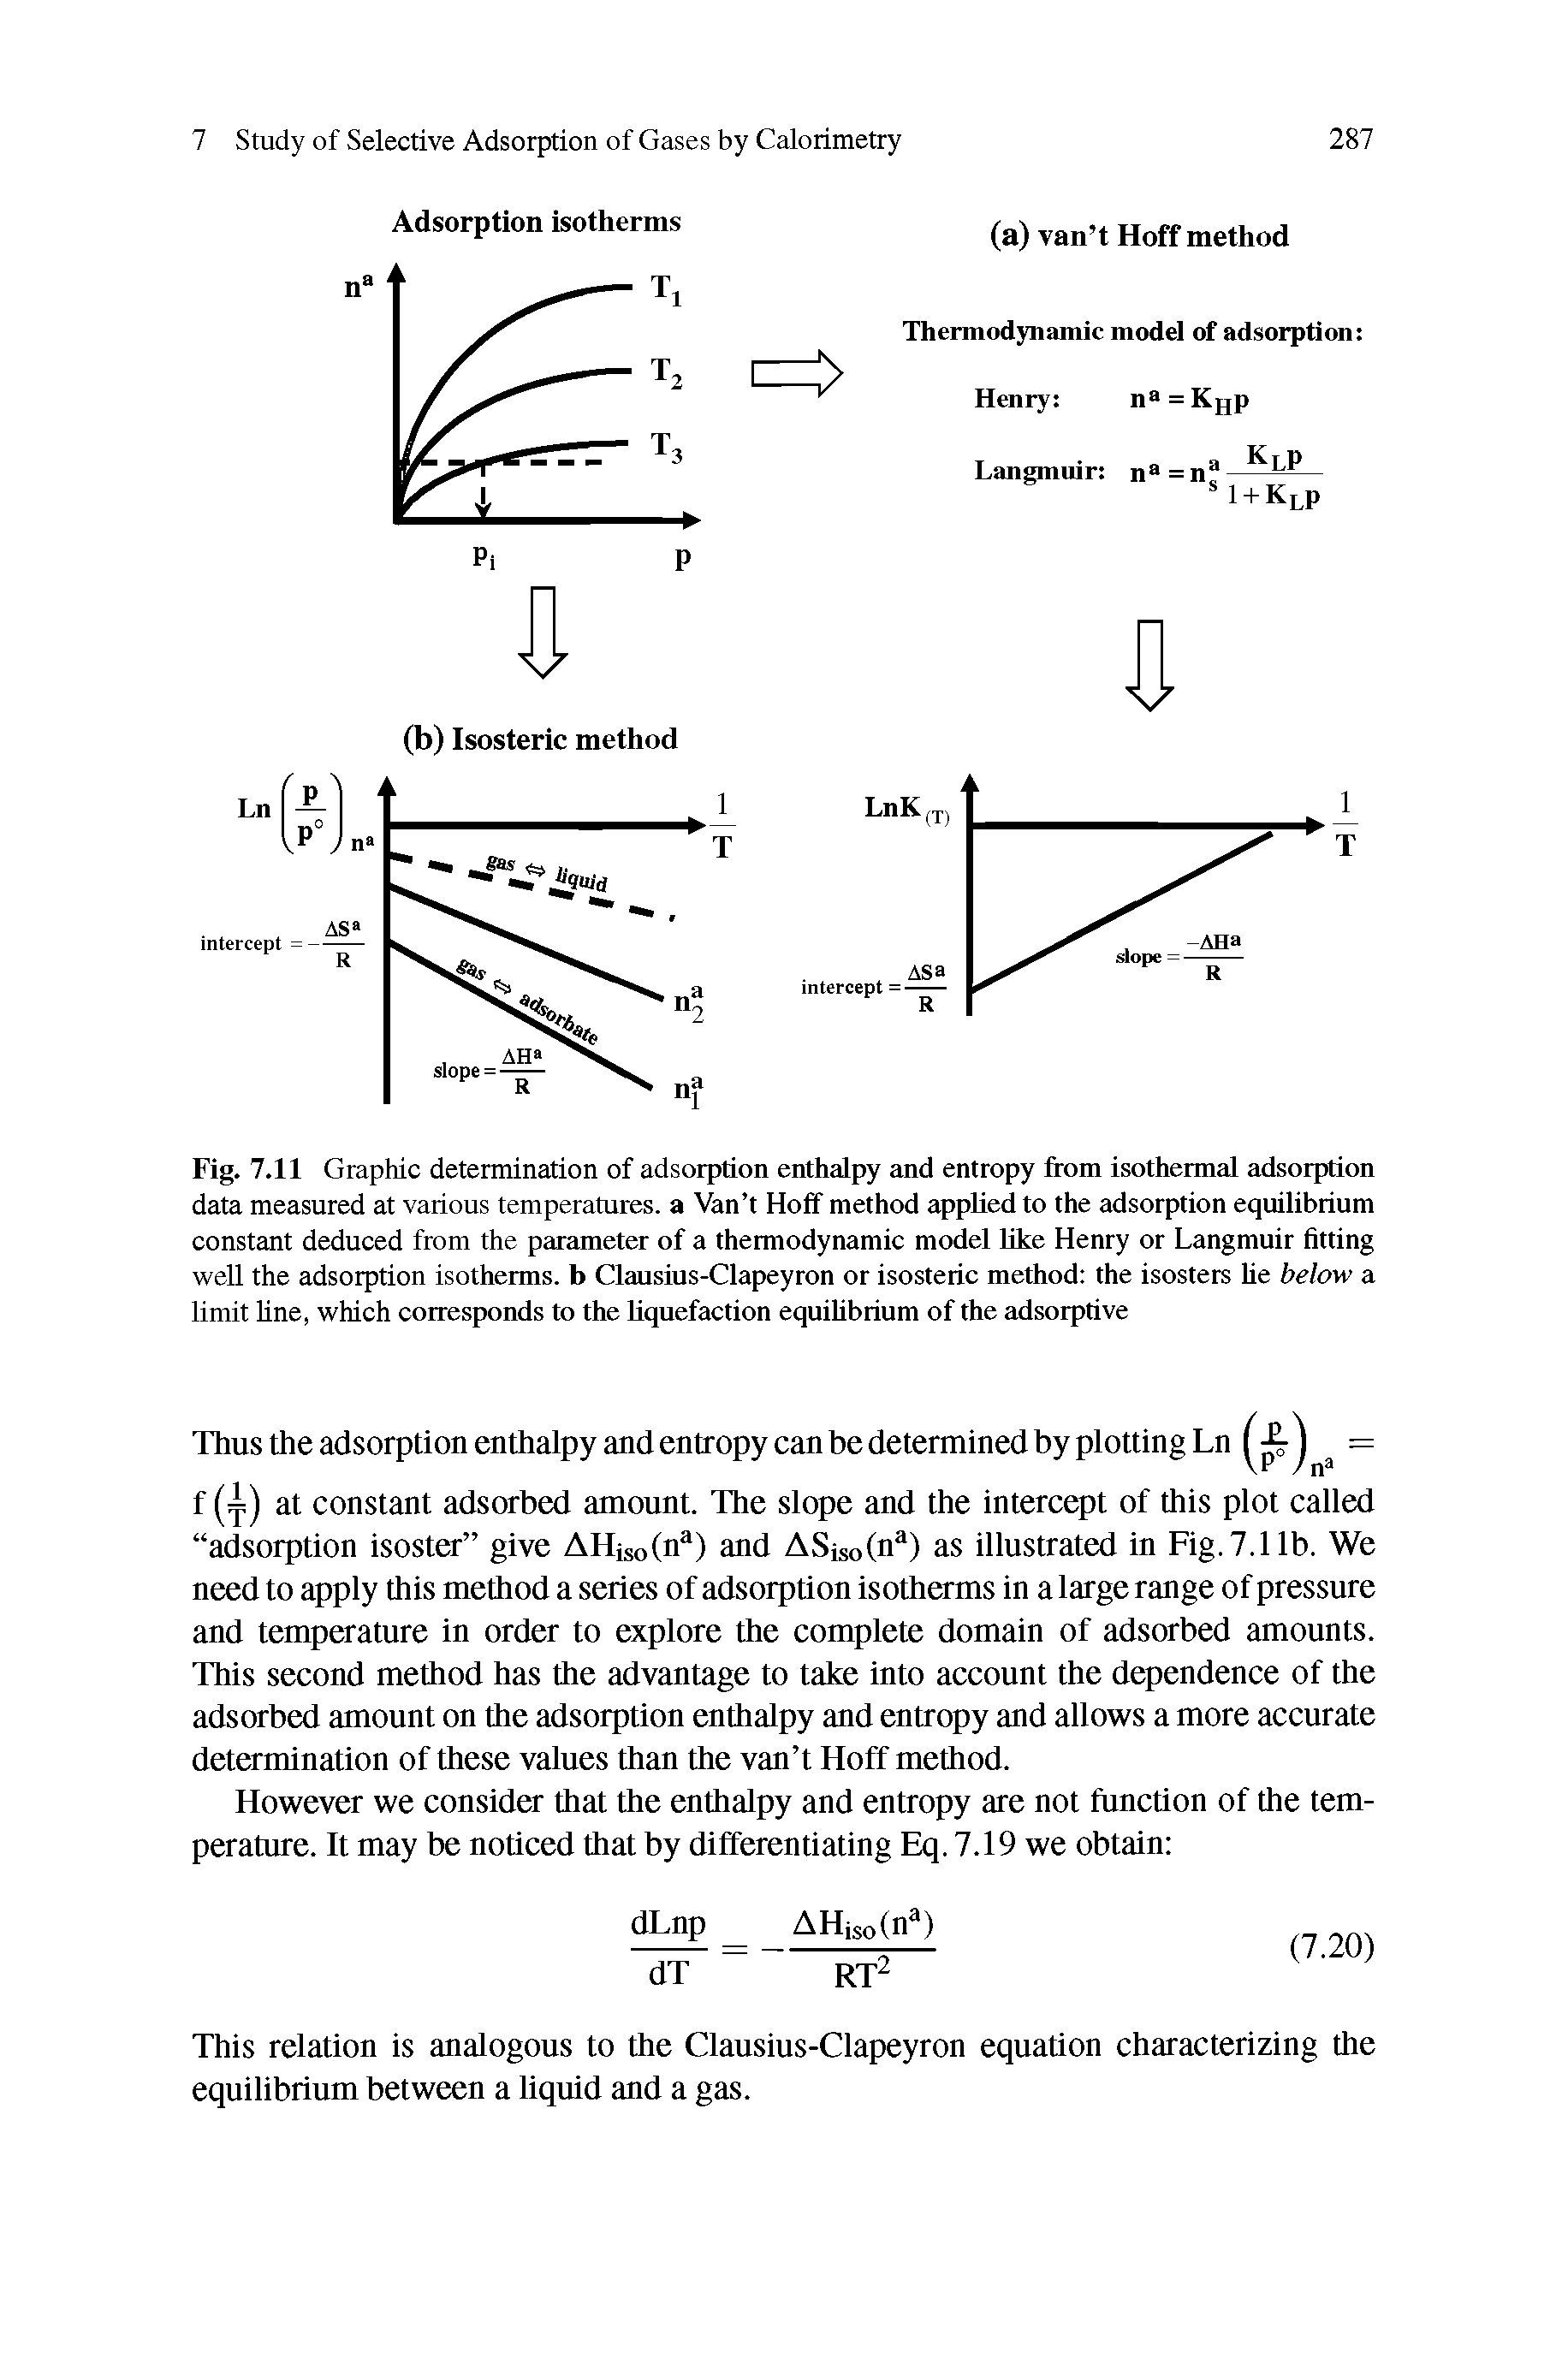 Fig. 7.11 Grapliic determination of adsorption enthalpy and entropy from isothermal adsorption data measured at various temperatures, a Van t Hoff method applied to the adsorption equilibrium constant deduced from the parameter of a thermodynamic model like Henry or Langmuir fitting well the adsorption isotherms, h Clausius-Clapeyron or isosteric method the isosters he below a limit Une, which corresponds to the liquefaction equihbrium of the adsorptive...